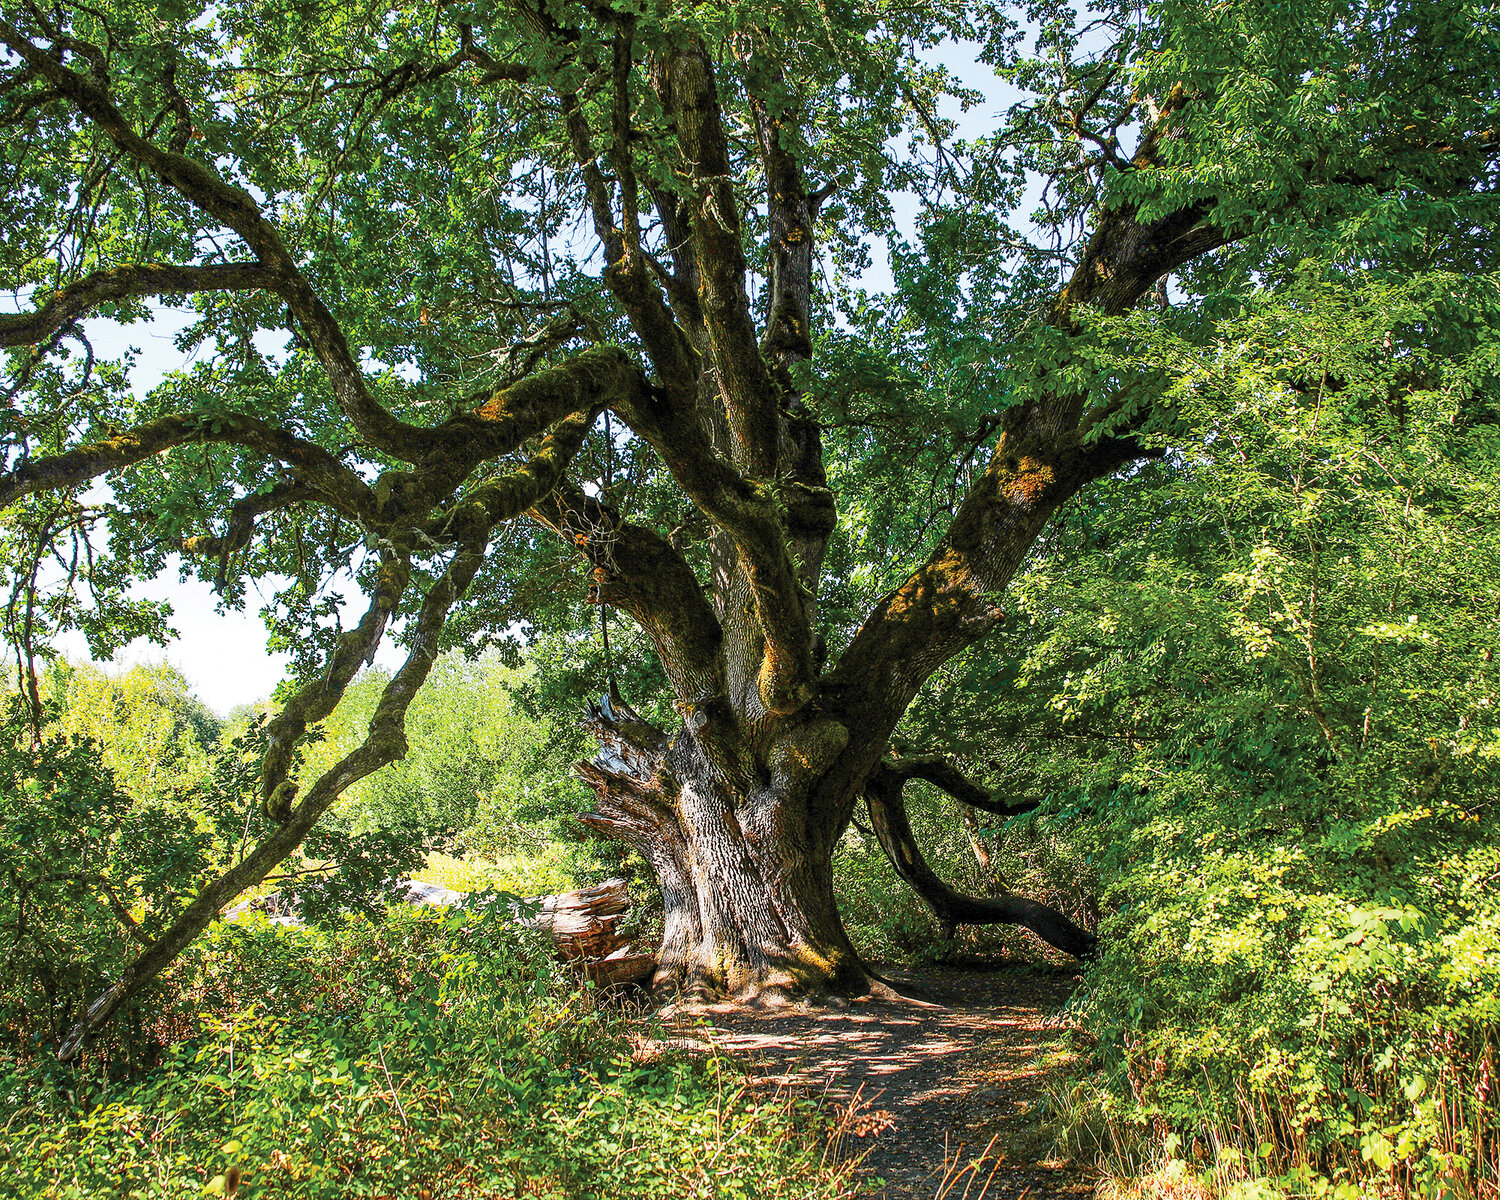 Oregon white oak trees line the Oaks to Wetland trail at the Ridgefield National Wildlife Refuge’s Carty Unit.